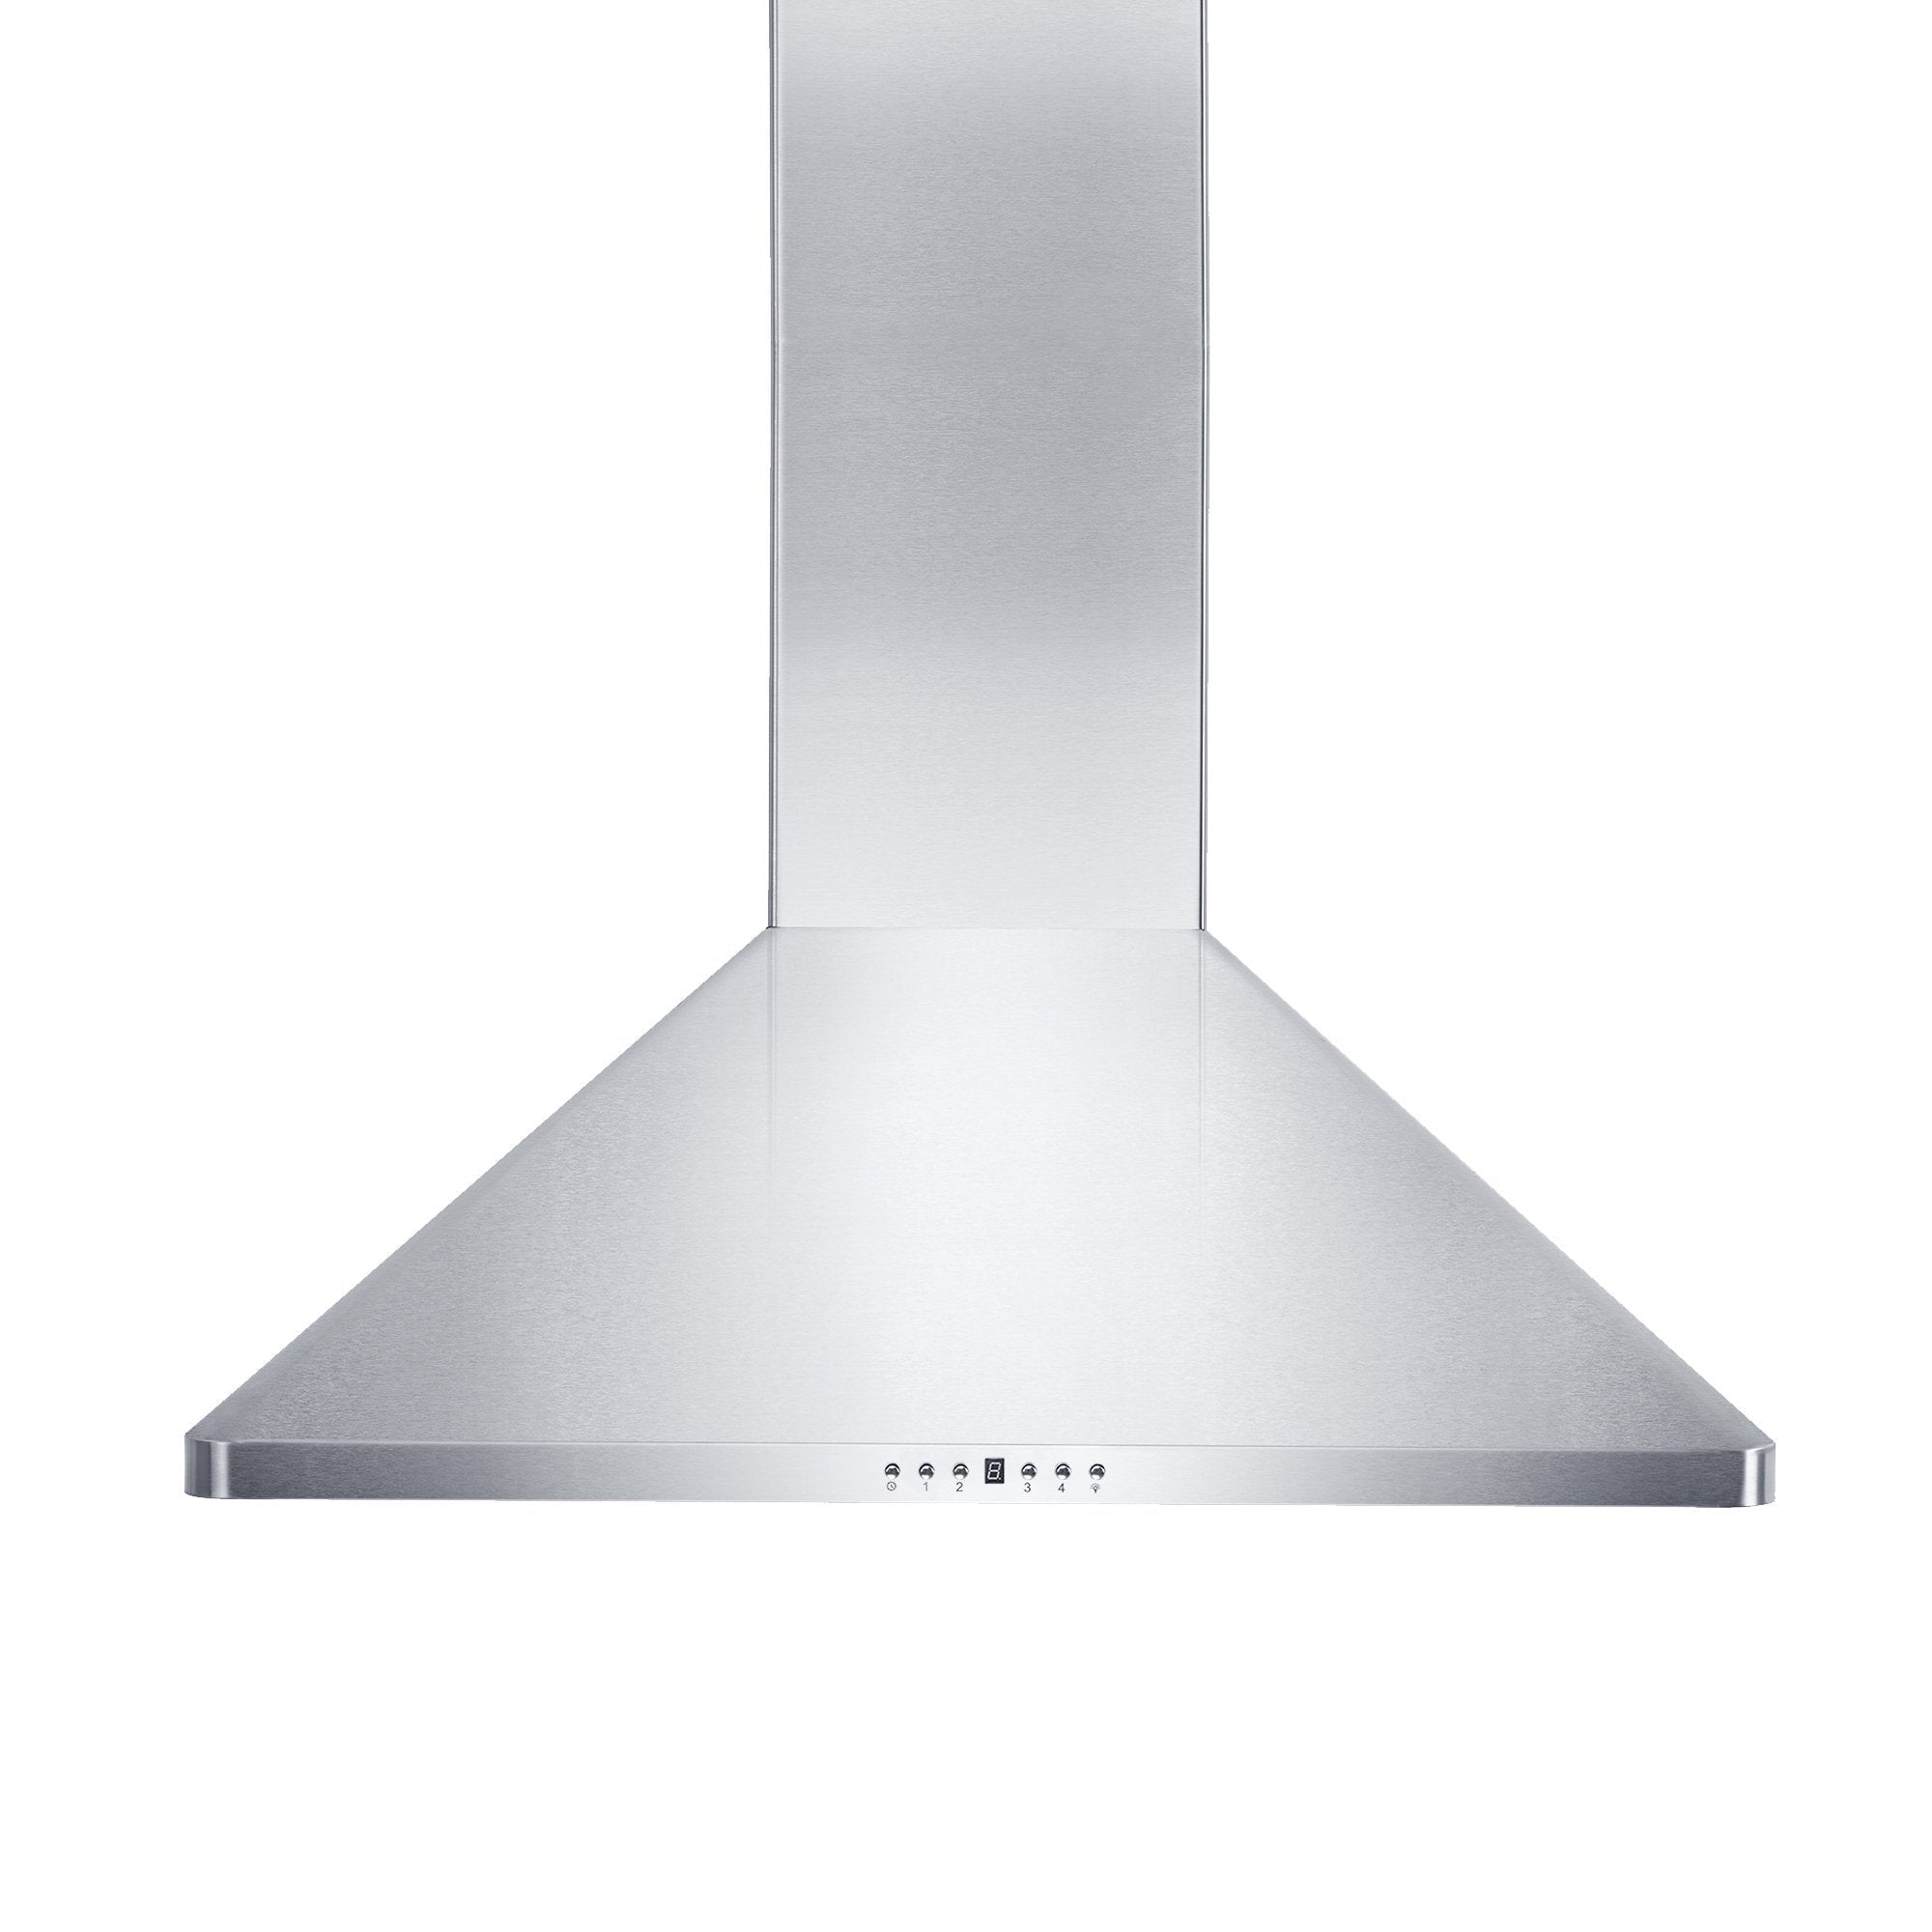 ZLINE Convertible Vent Wall Mount Range Hood in Stainless Steel (KF1) front with button and display panel.